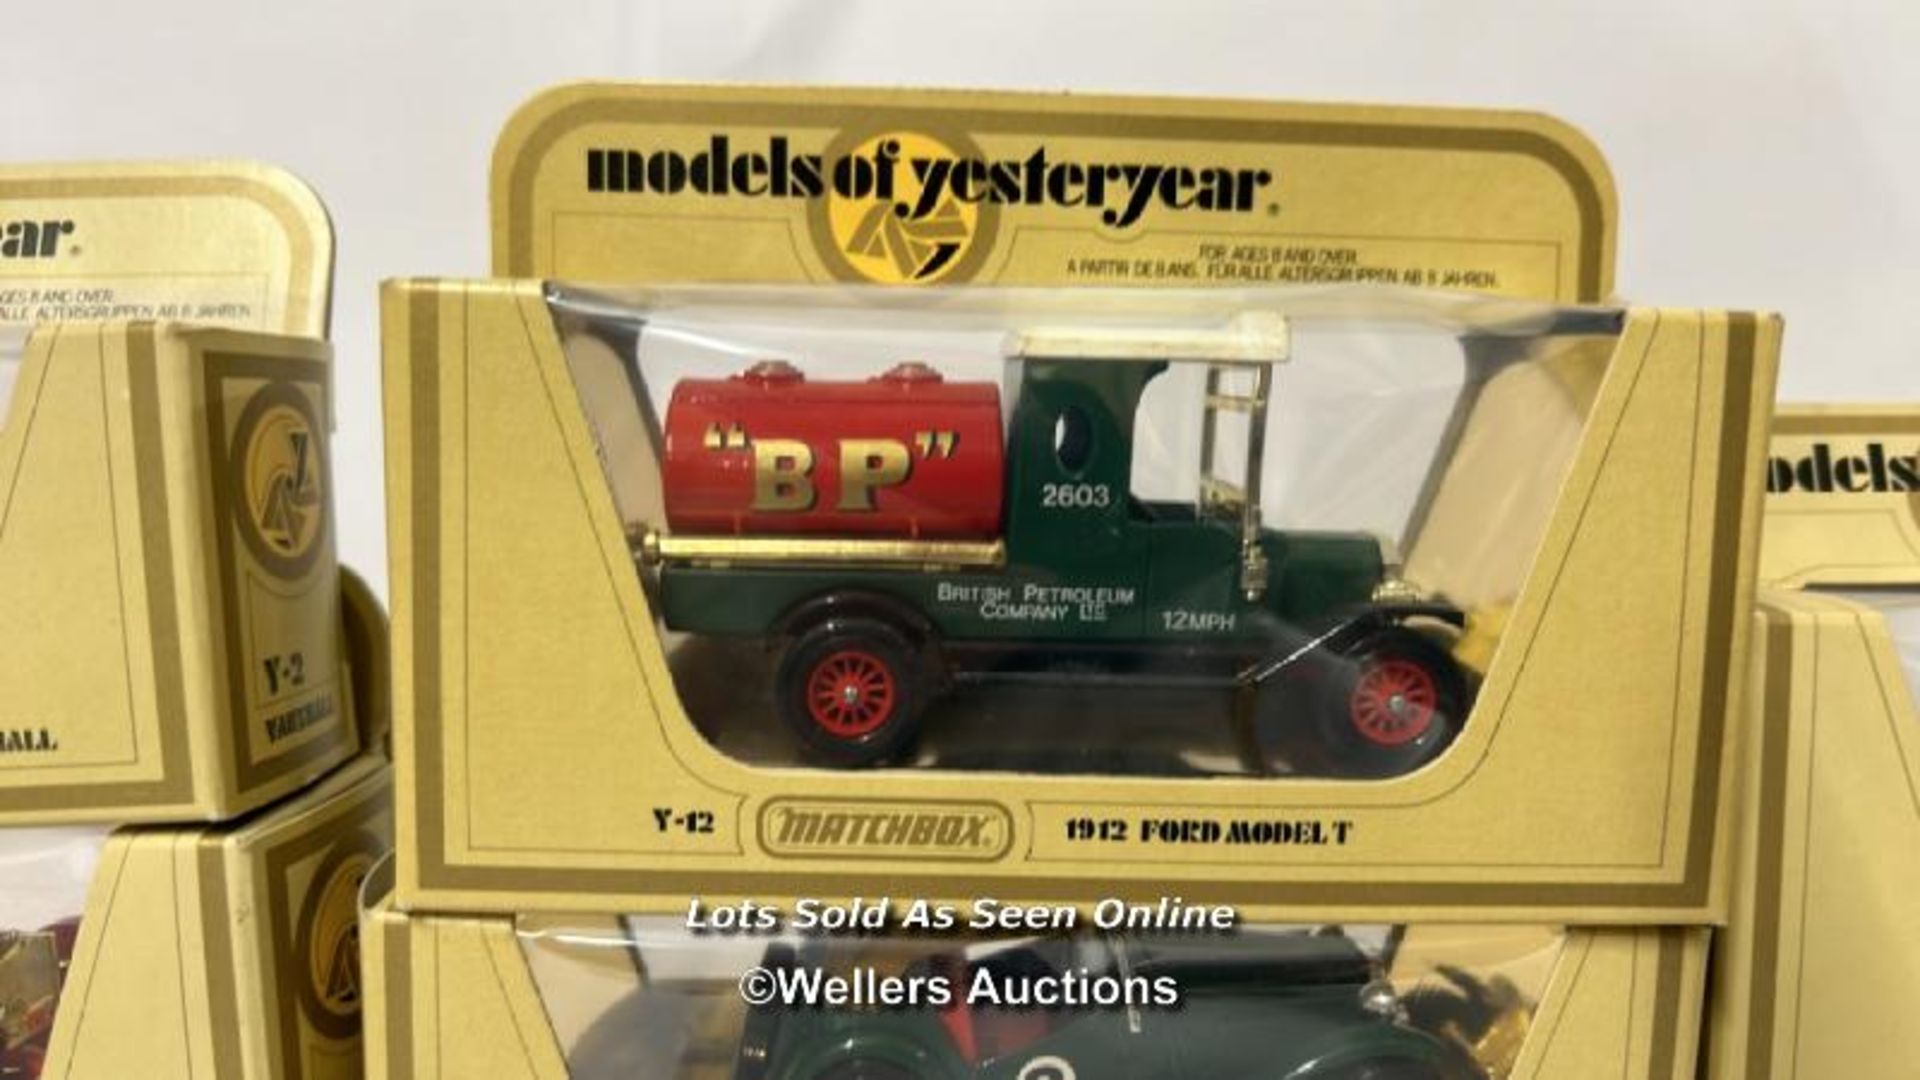 Group of Fourteen boxed Matchbox Models of Yesteryear cars including 1920 Rolls-Royce / AN11 - Image 5 of 10